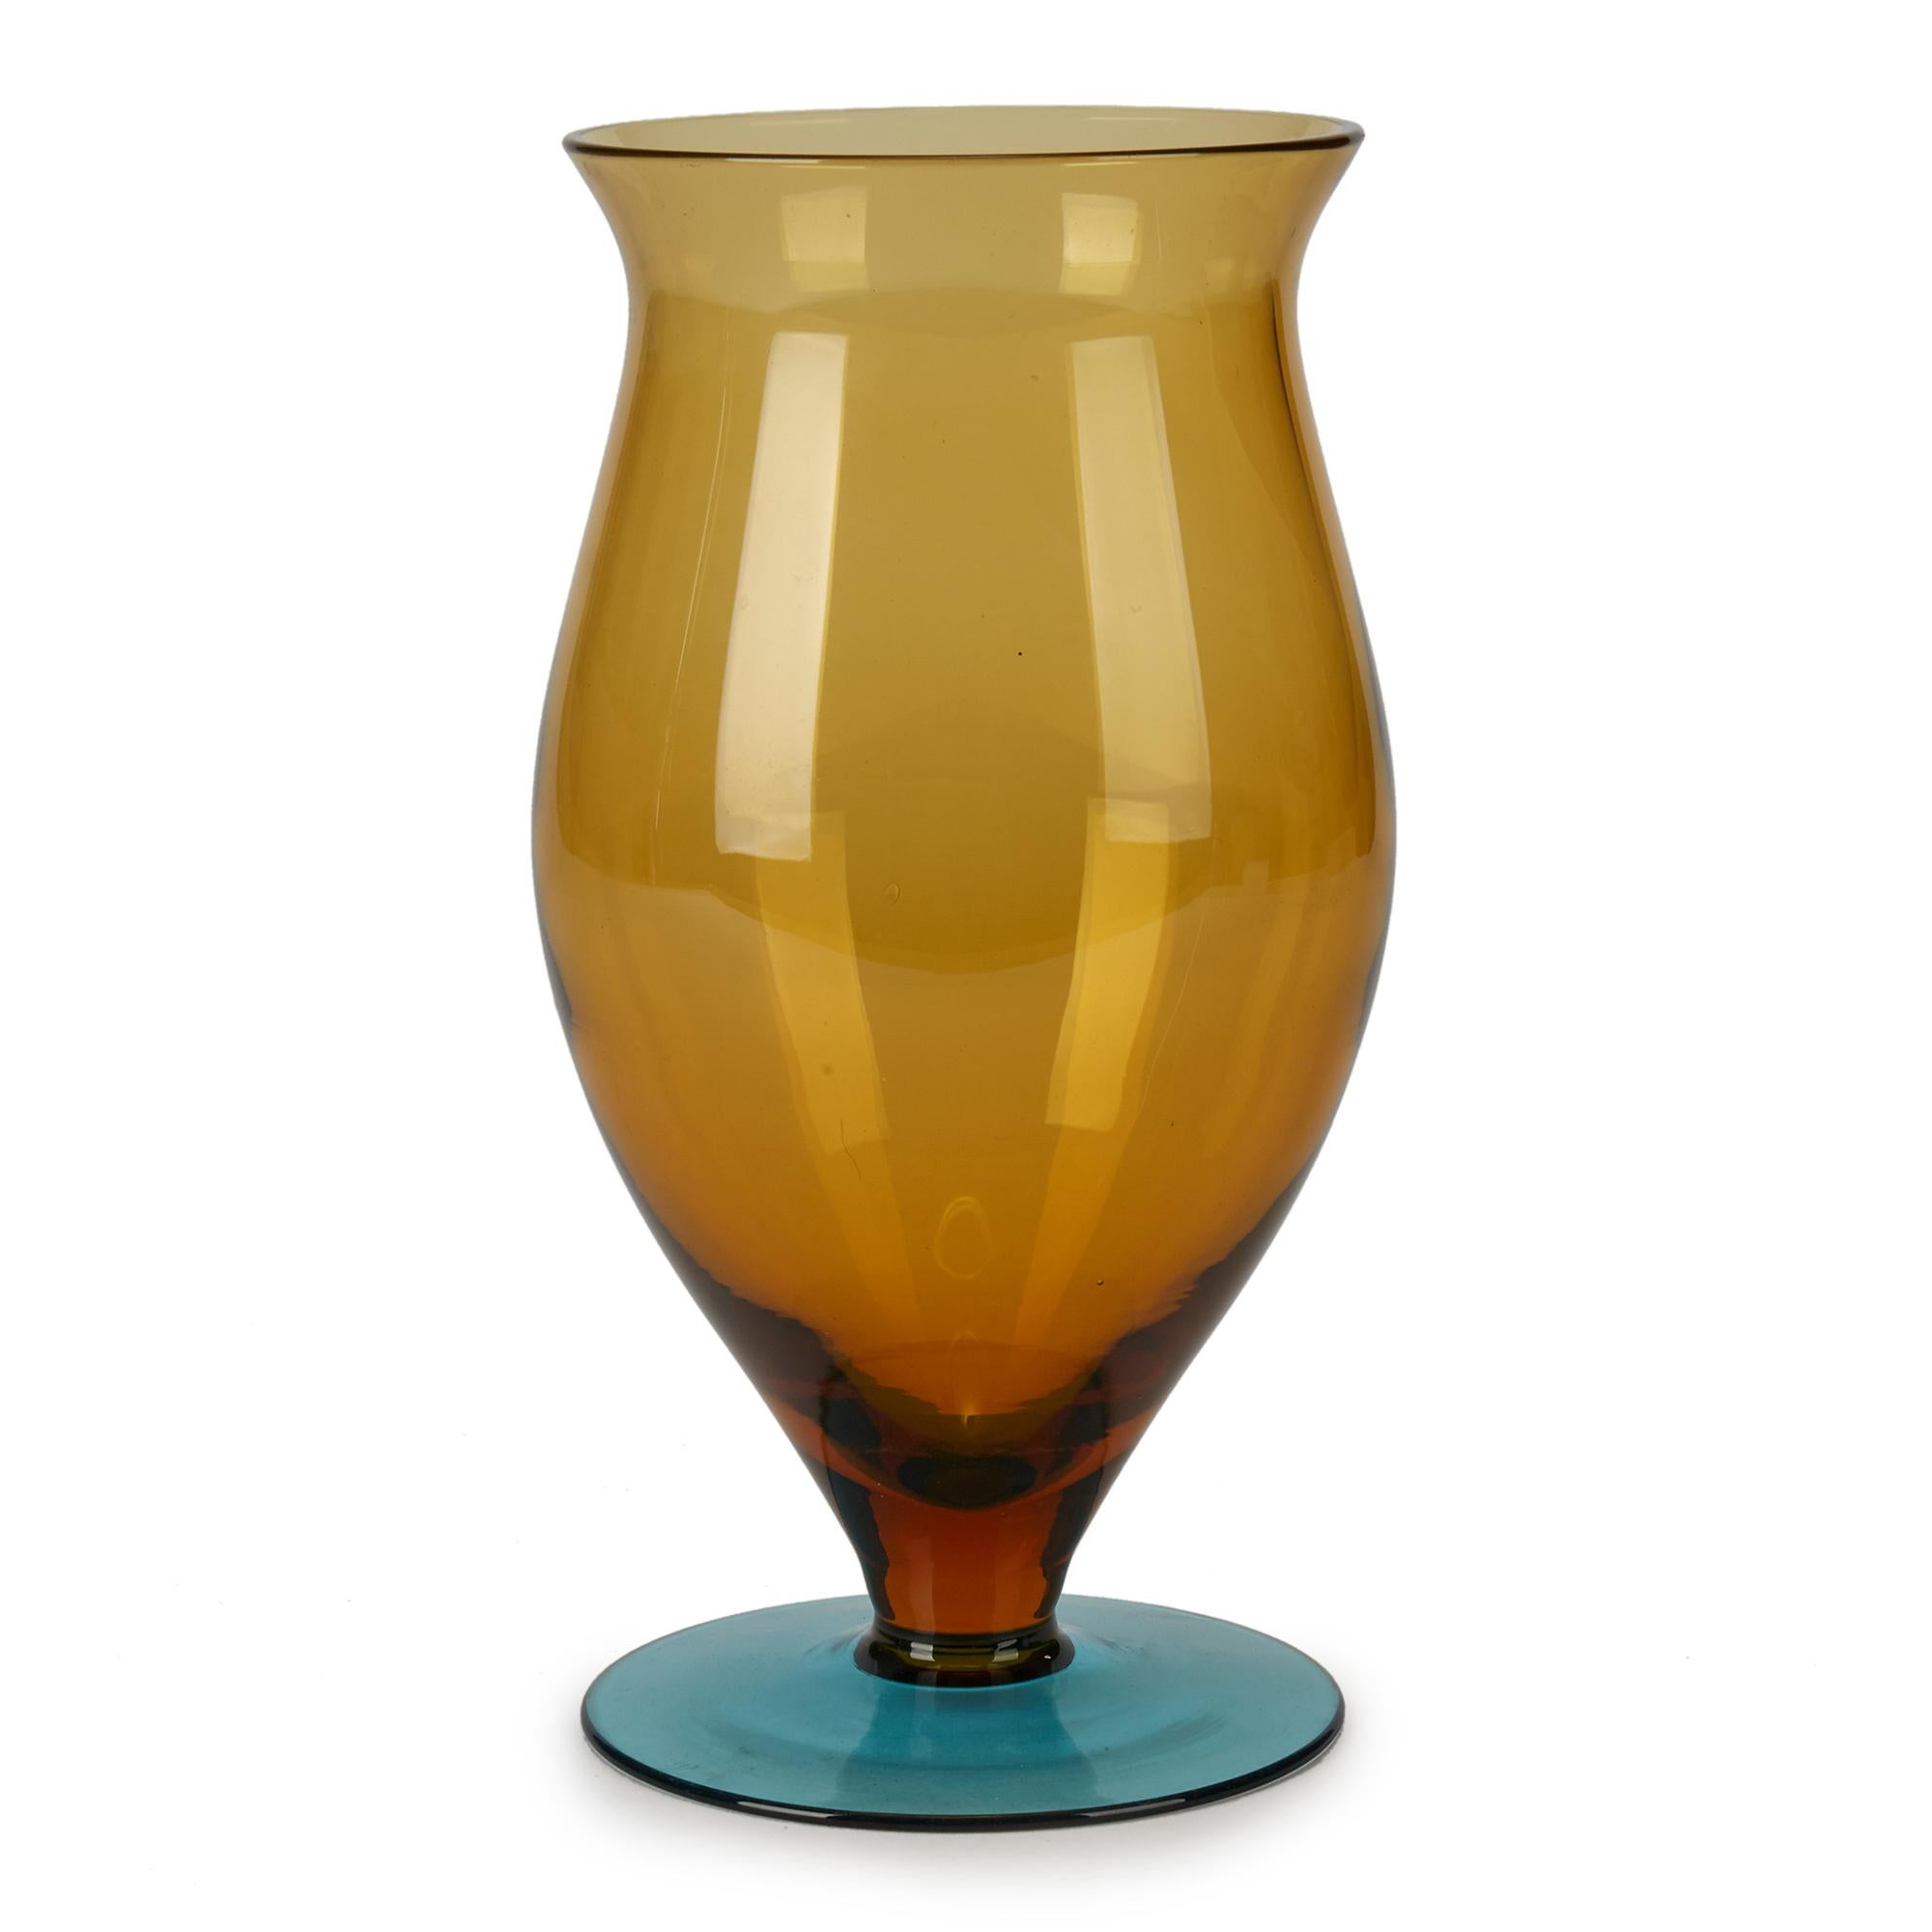 A very stylish vintage hand blown art glass pedestal vase with an amber glass bulbous bud shaped body on a blue glass foot. This stylish vase has the customary handcrafted fine inclusions within the body and is not marked but has wear to the foot